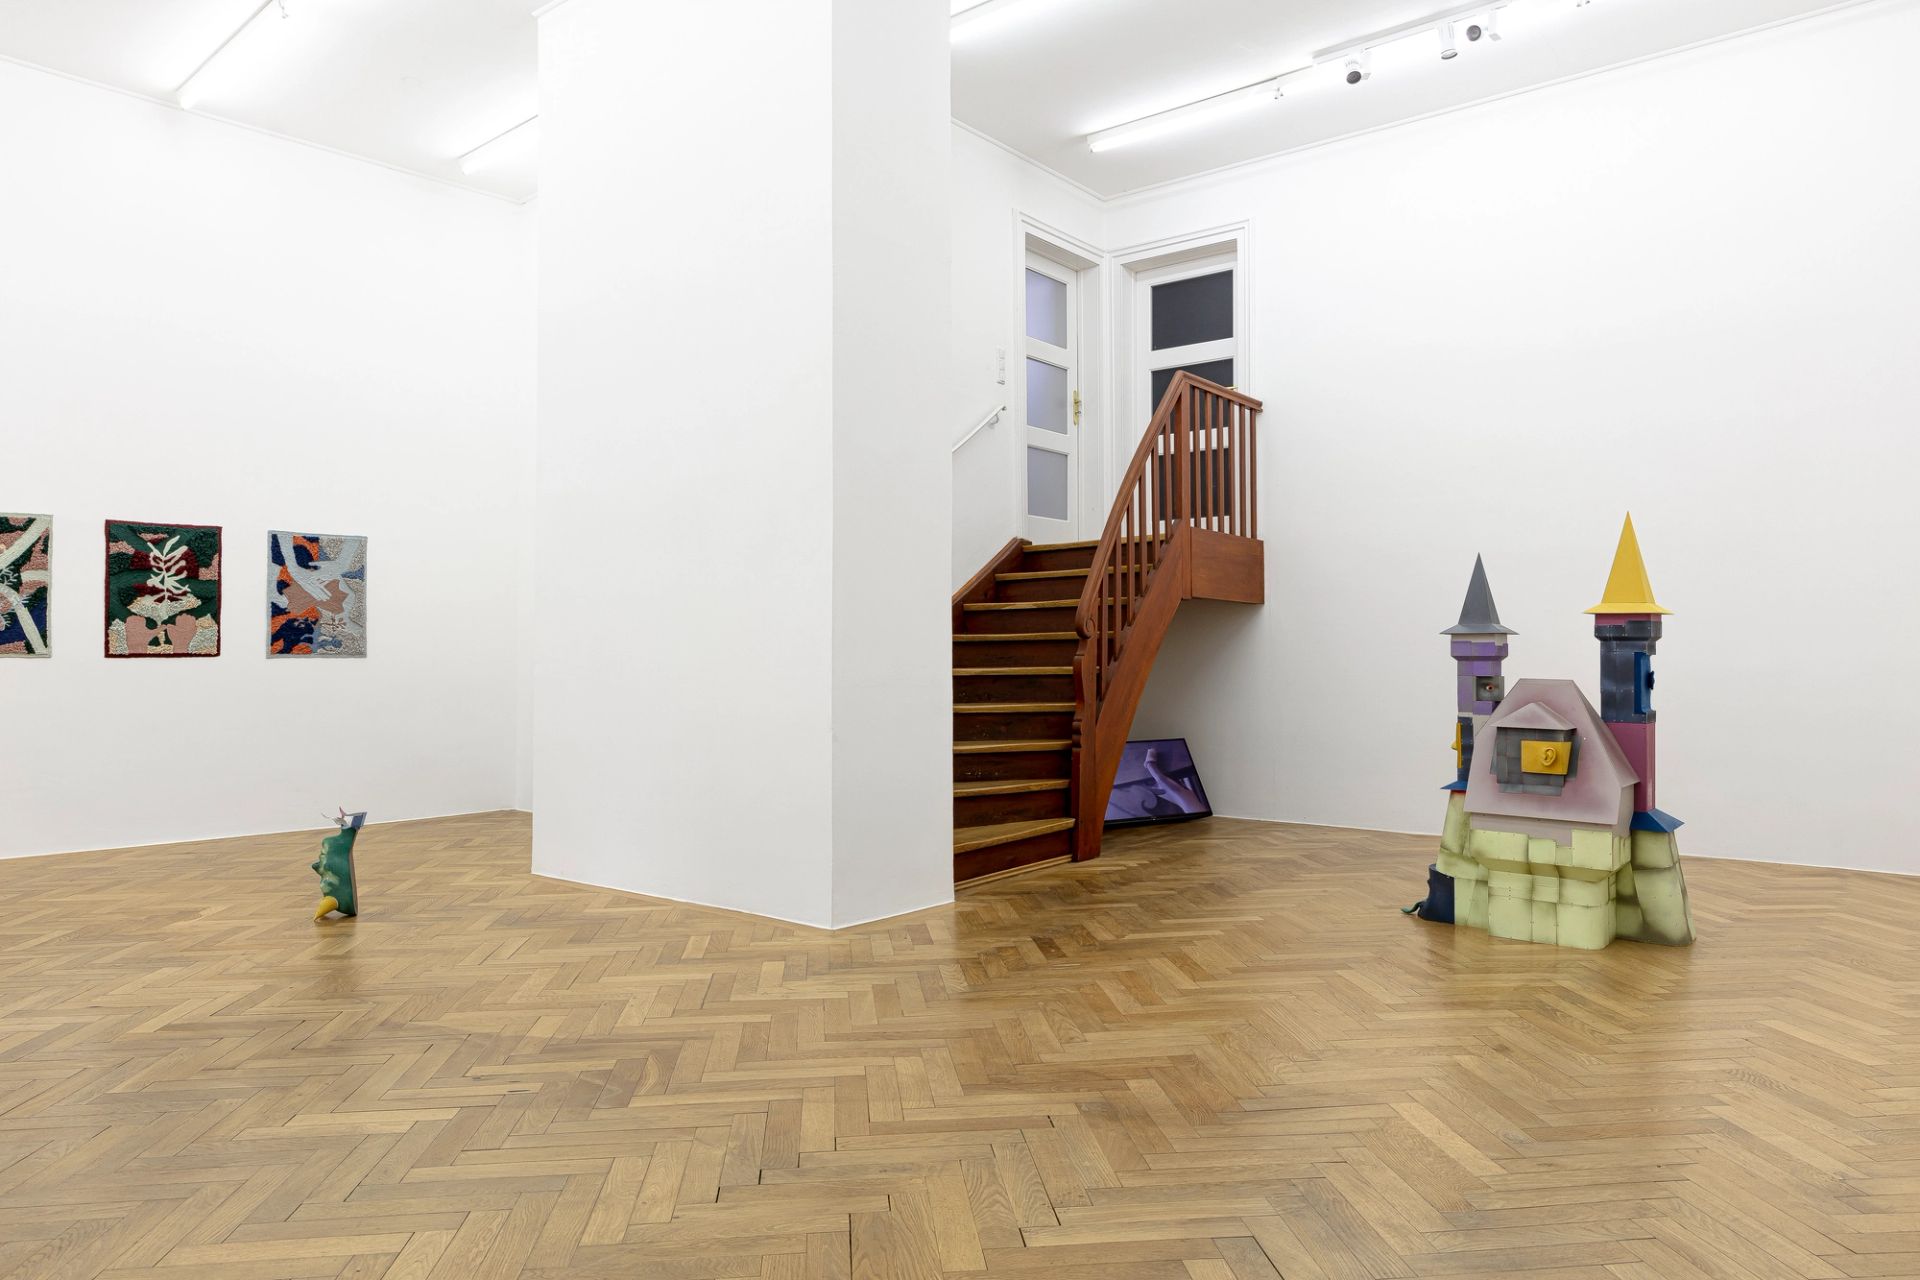 Throw of the dice, Lukas Hoffmann & Sophia Mainka, 2024, in collaboration with GiG Munich, exhibition view at Sperling